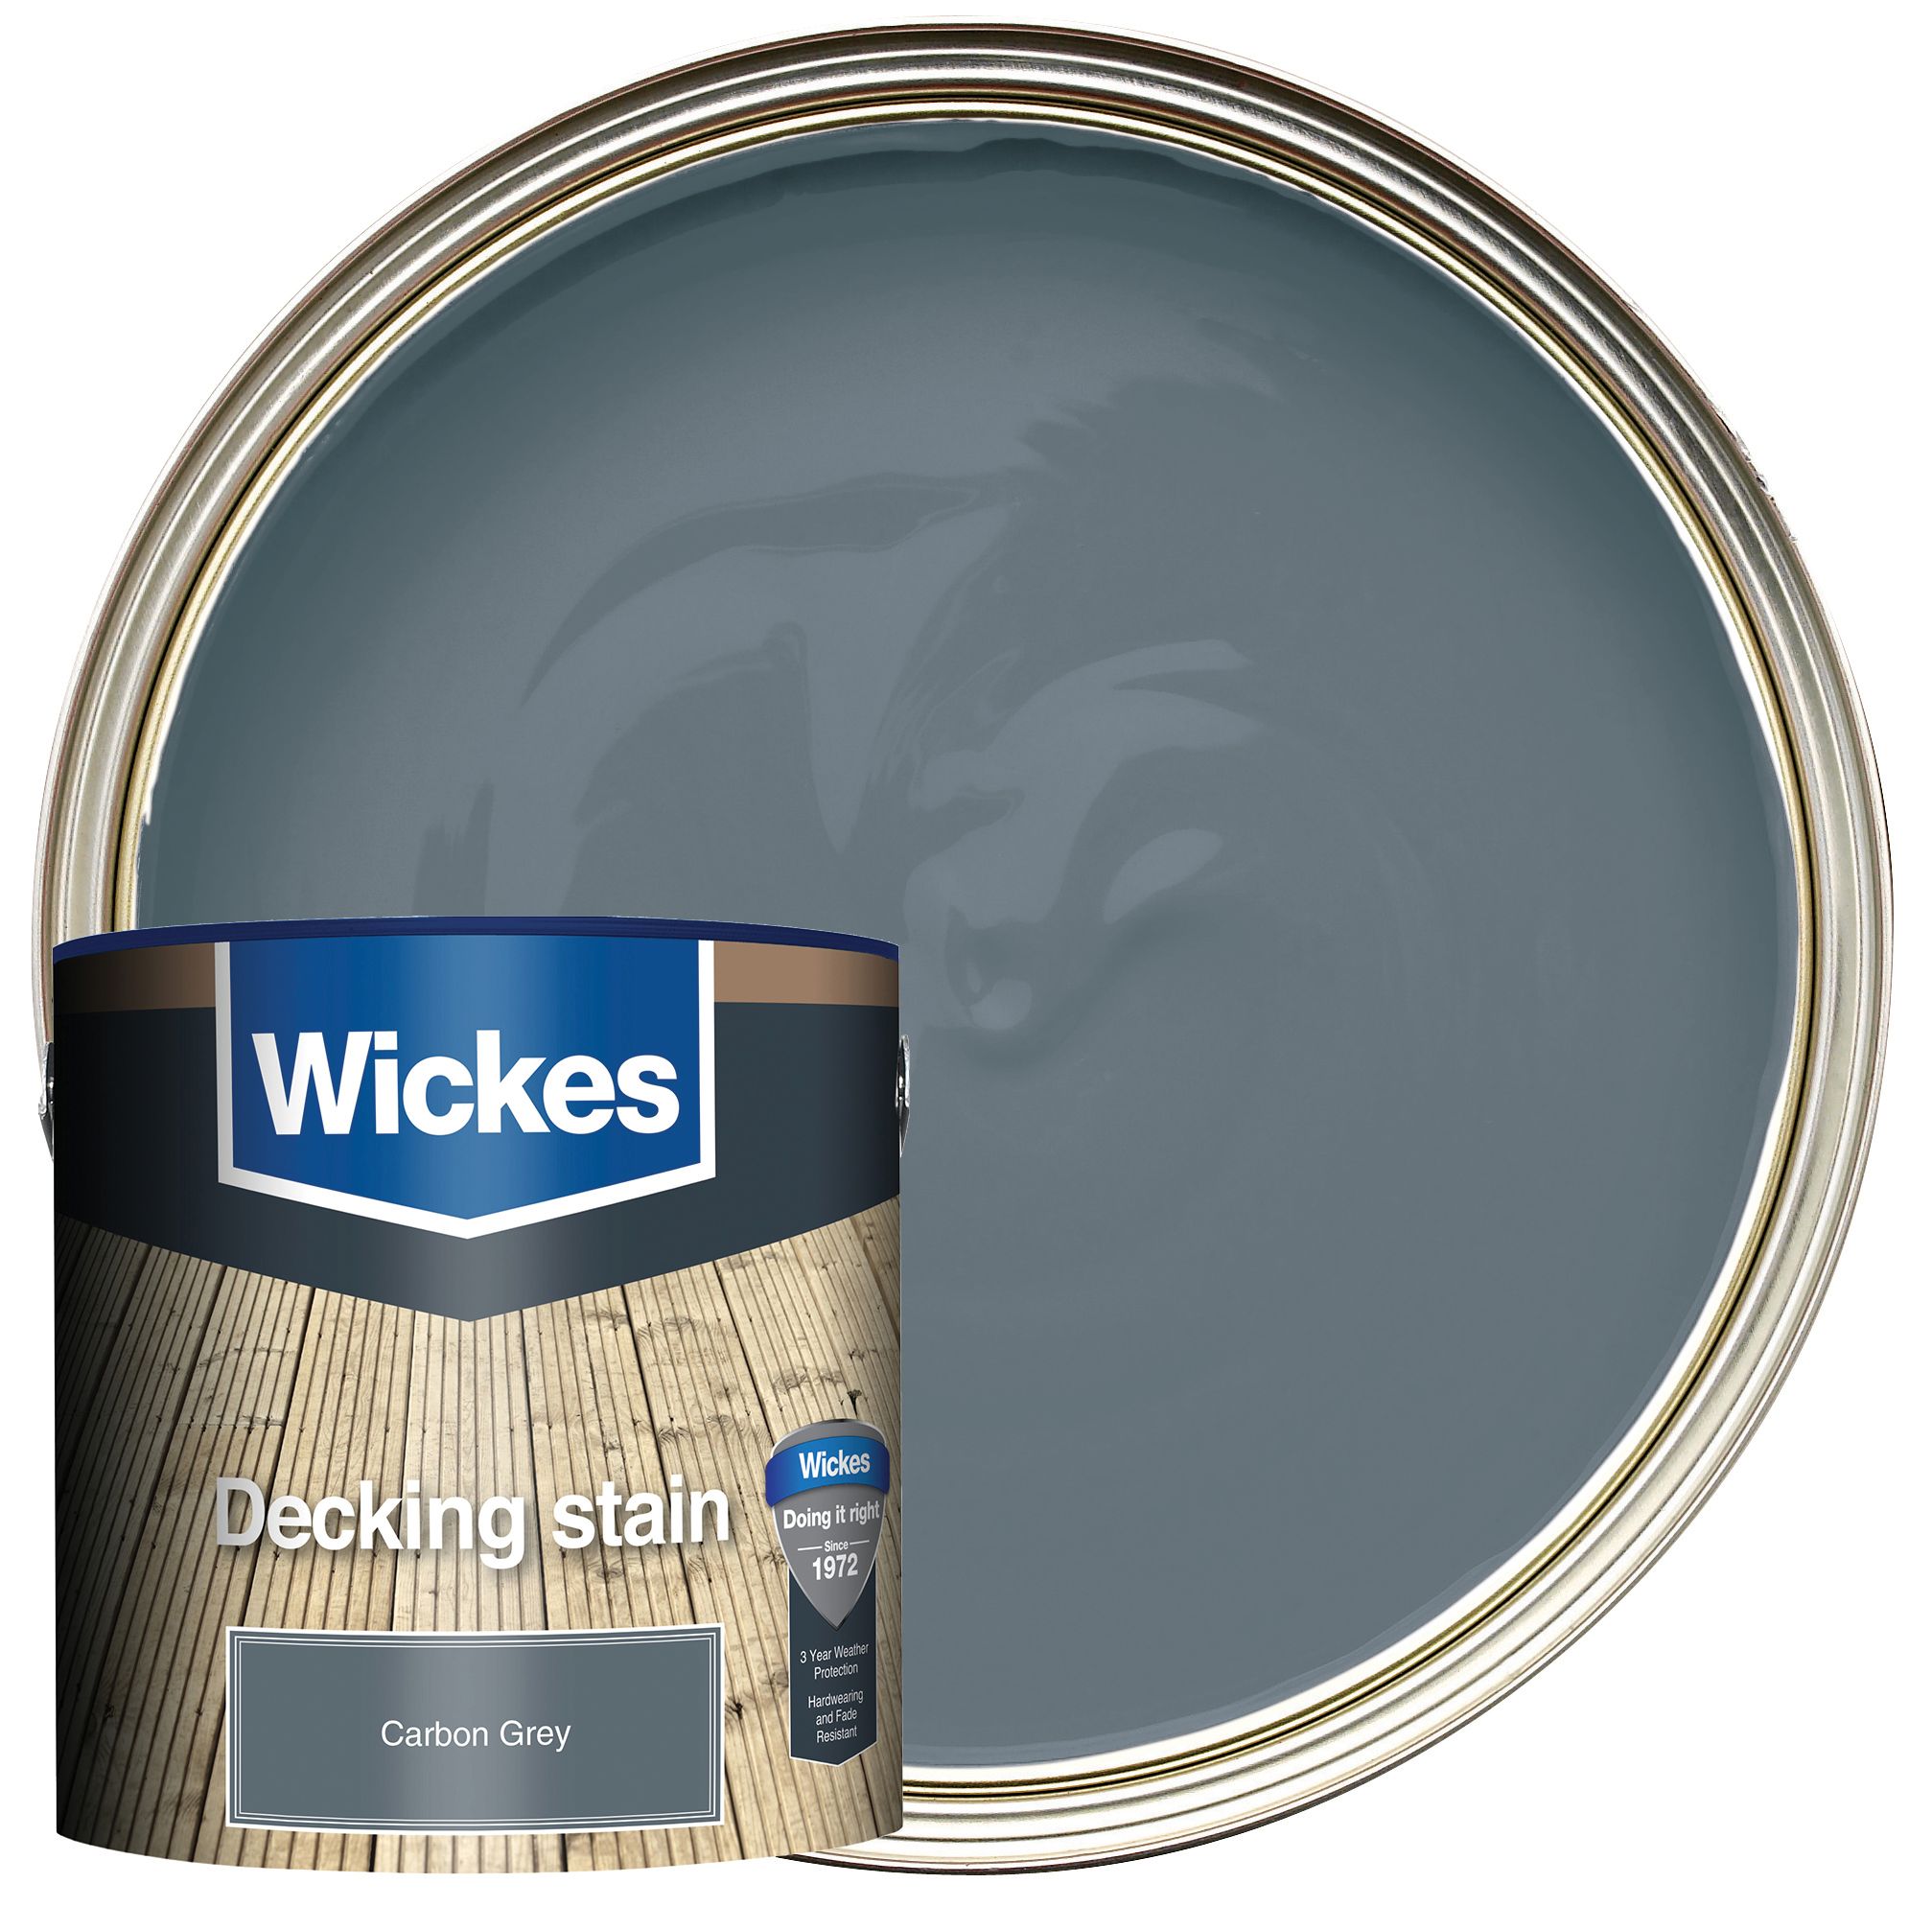 Image of Wickes Decking Stain Carbon Grey 2.5L